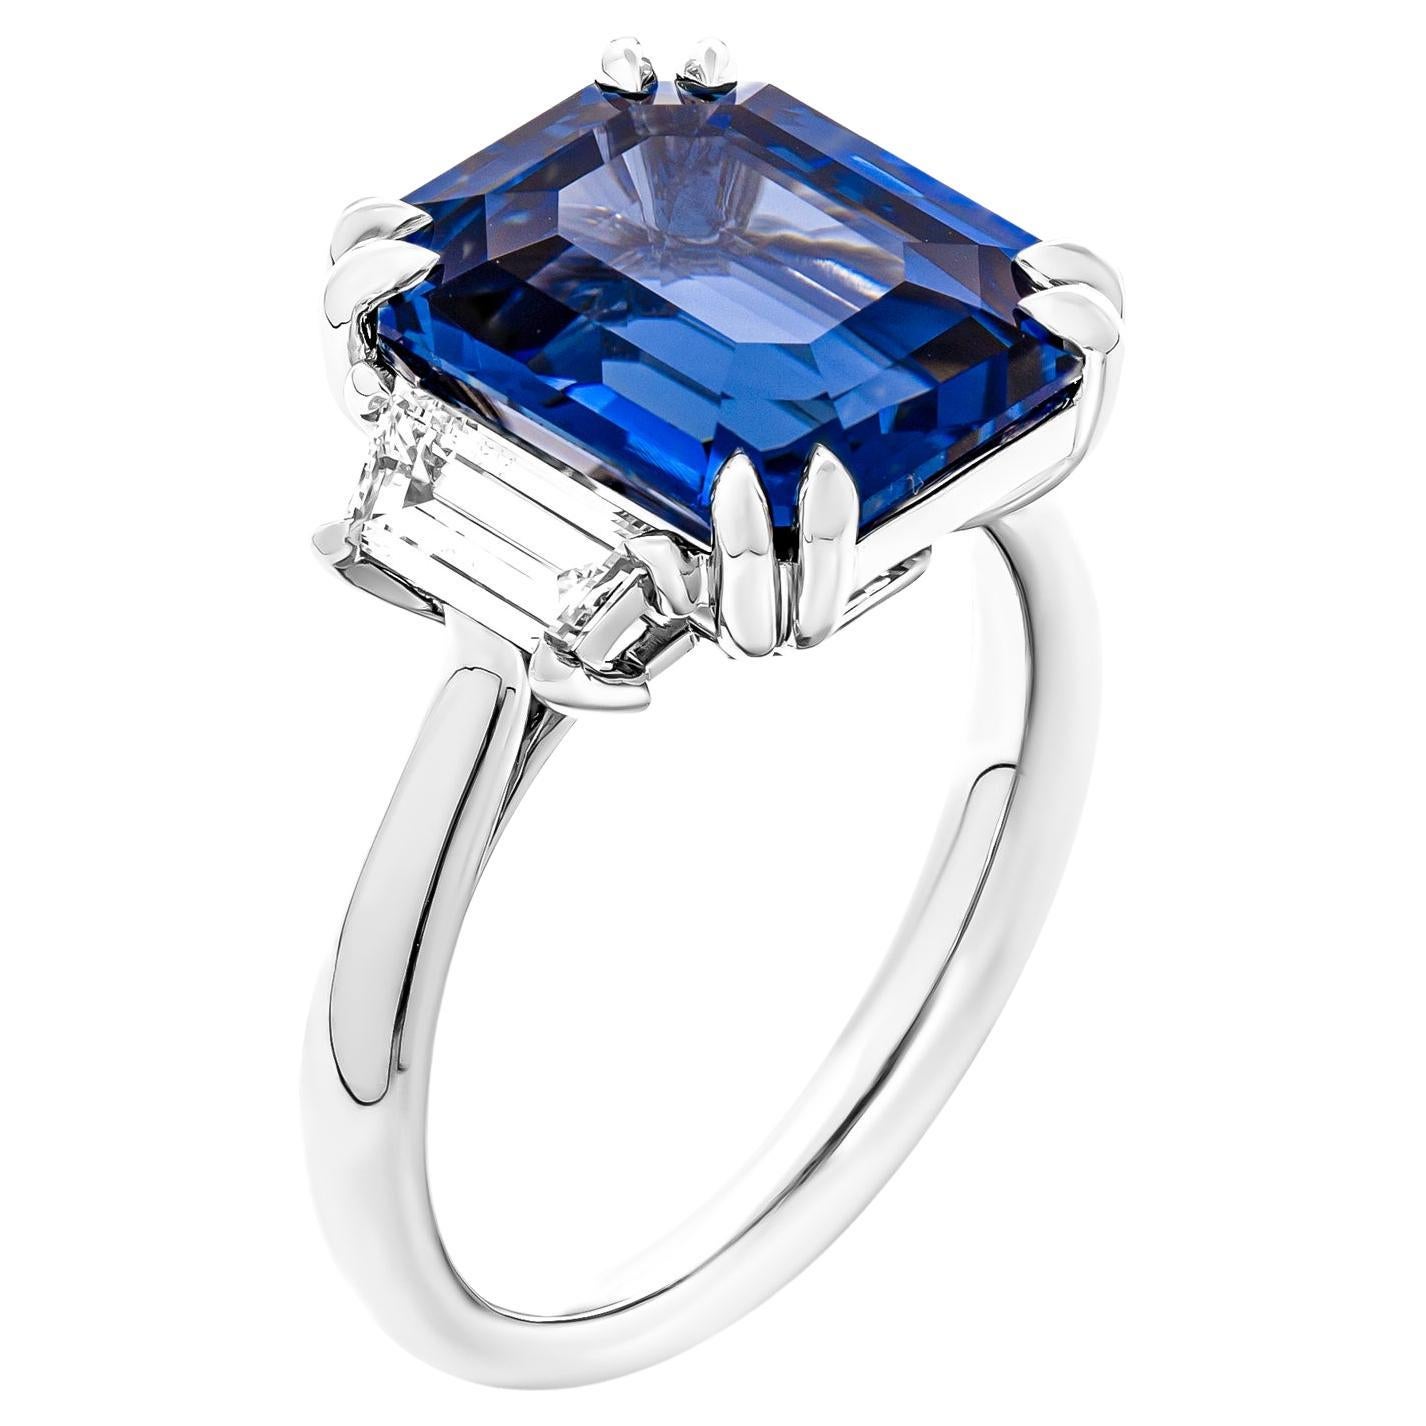 Certified 3 Stone Ring with 7.97ct Emerald Cut Blue Sapphire